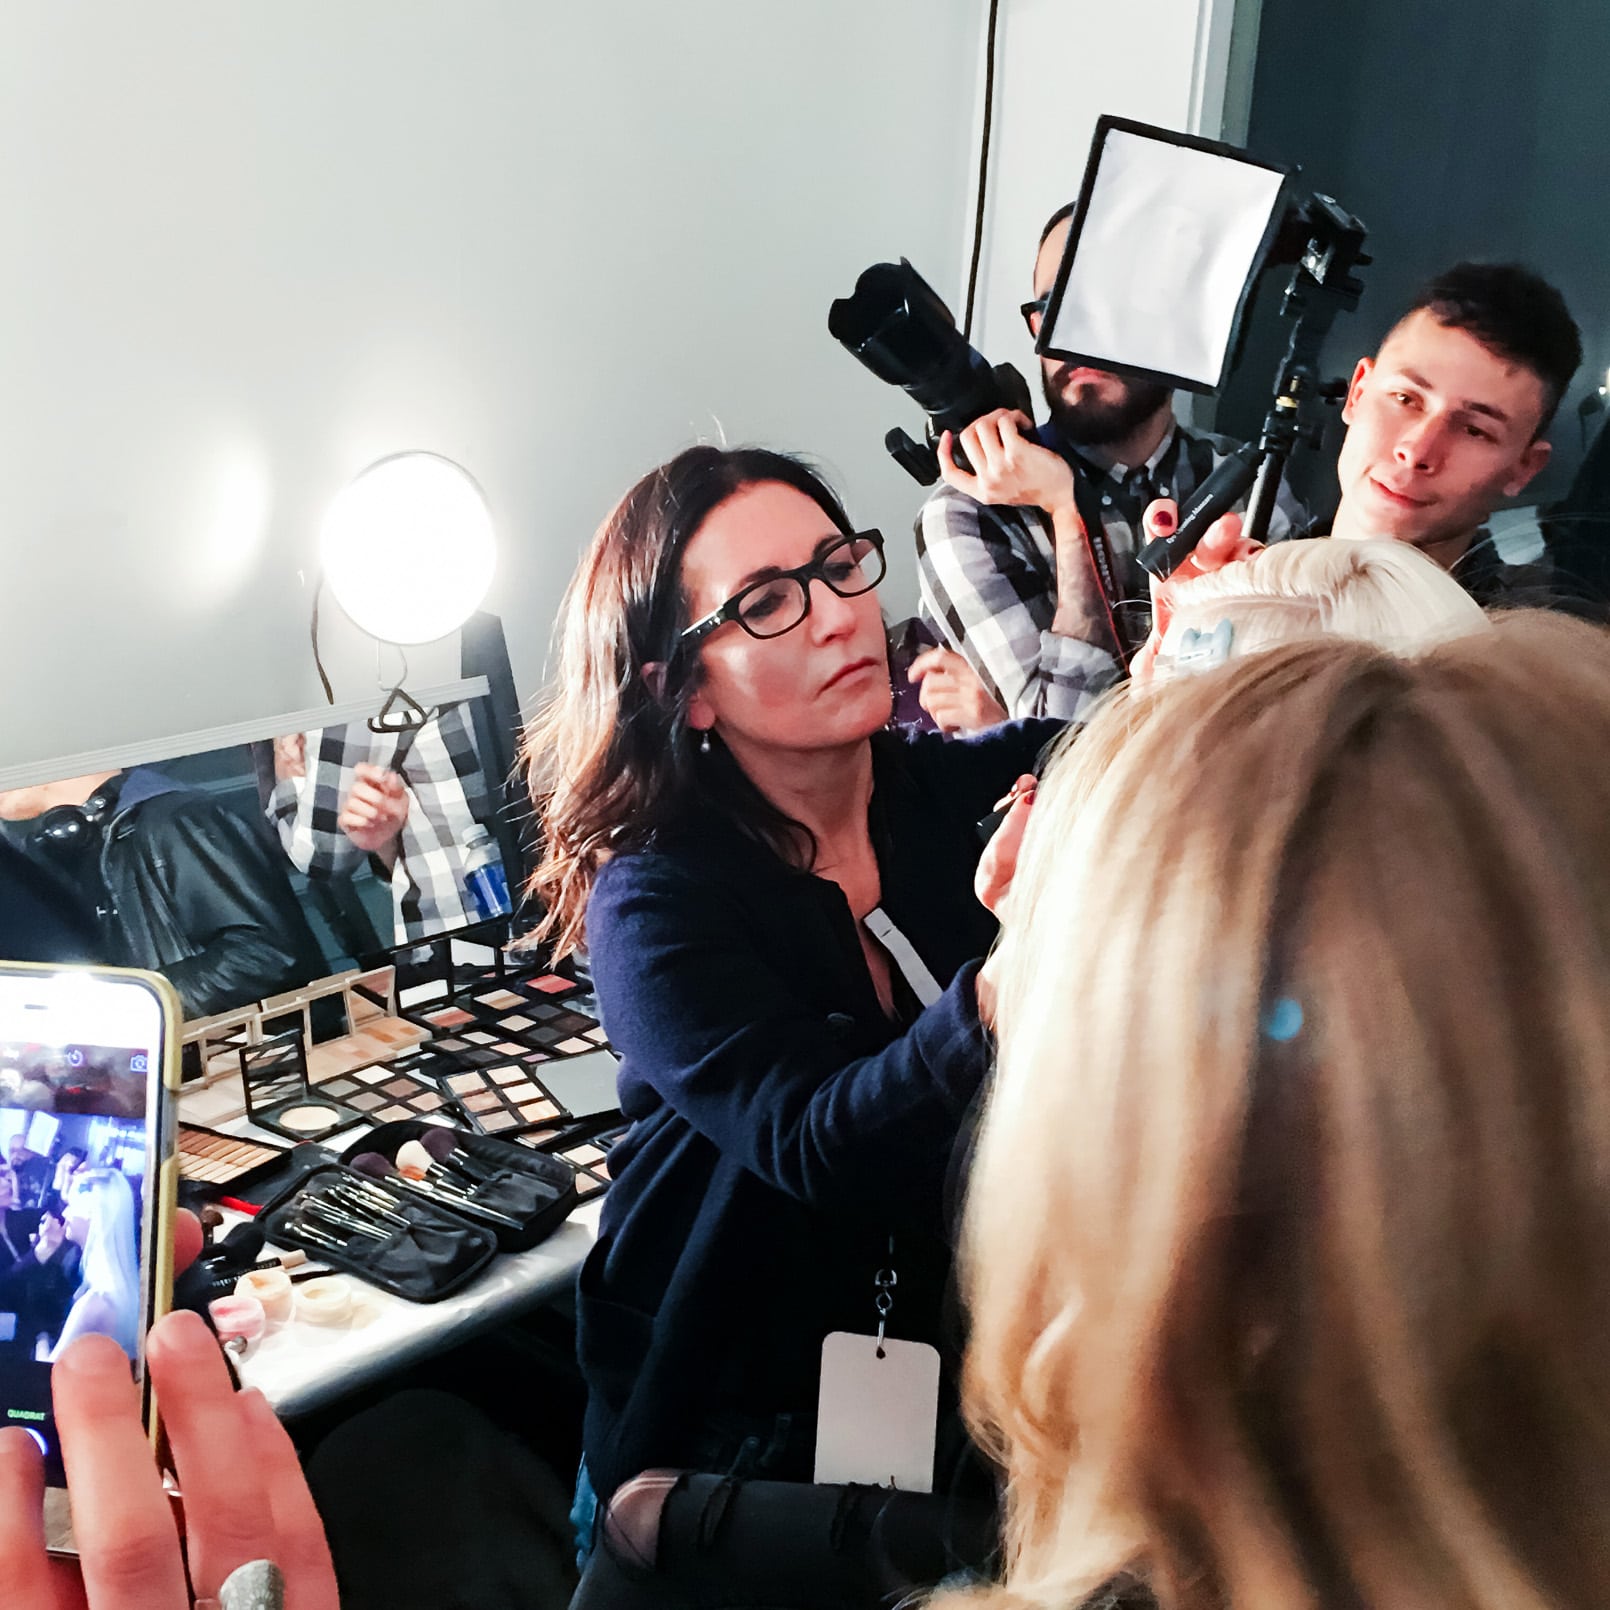 Pam Hetlinger, New York Fashion Week, backstage at the Jenny Packham show with Aveda and Bobbi Brown-1 copy